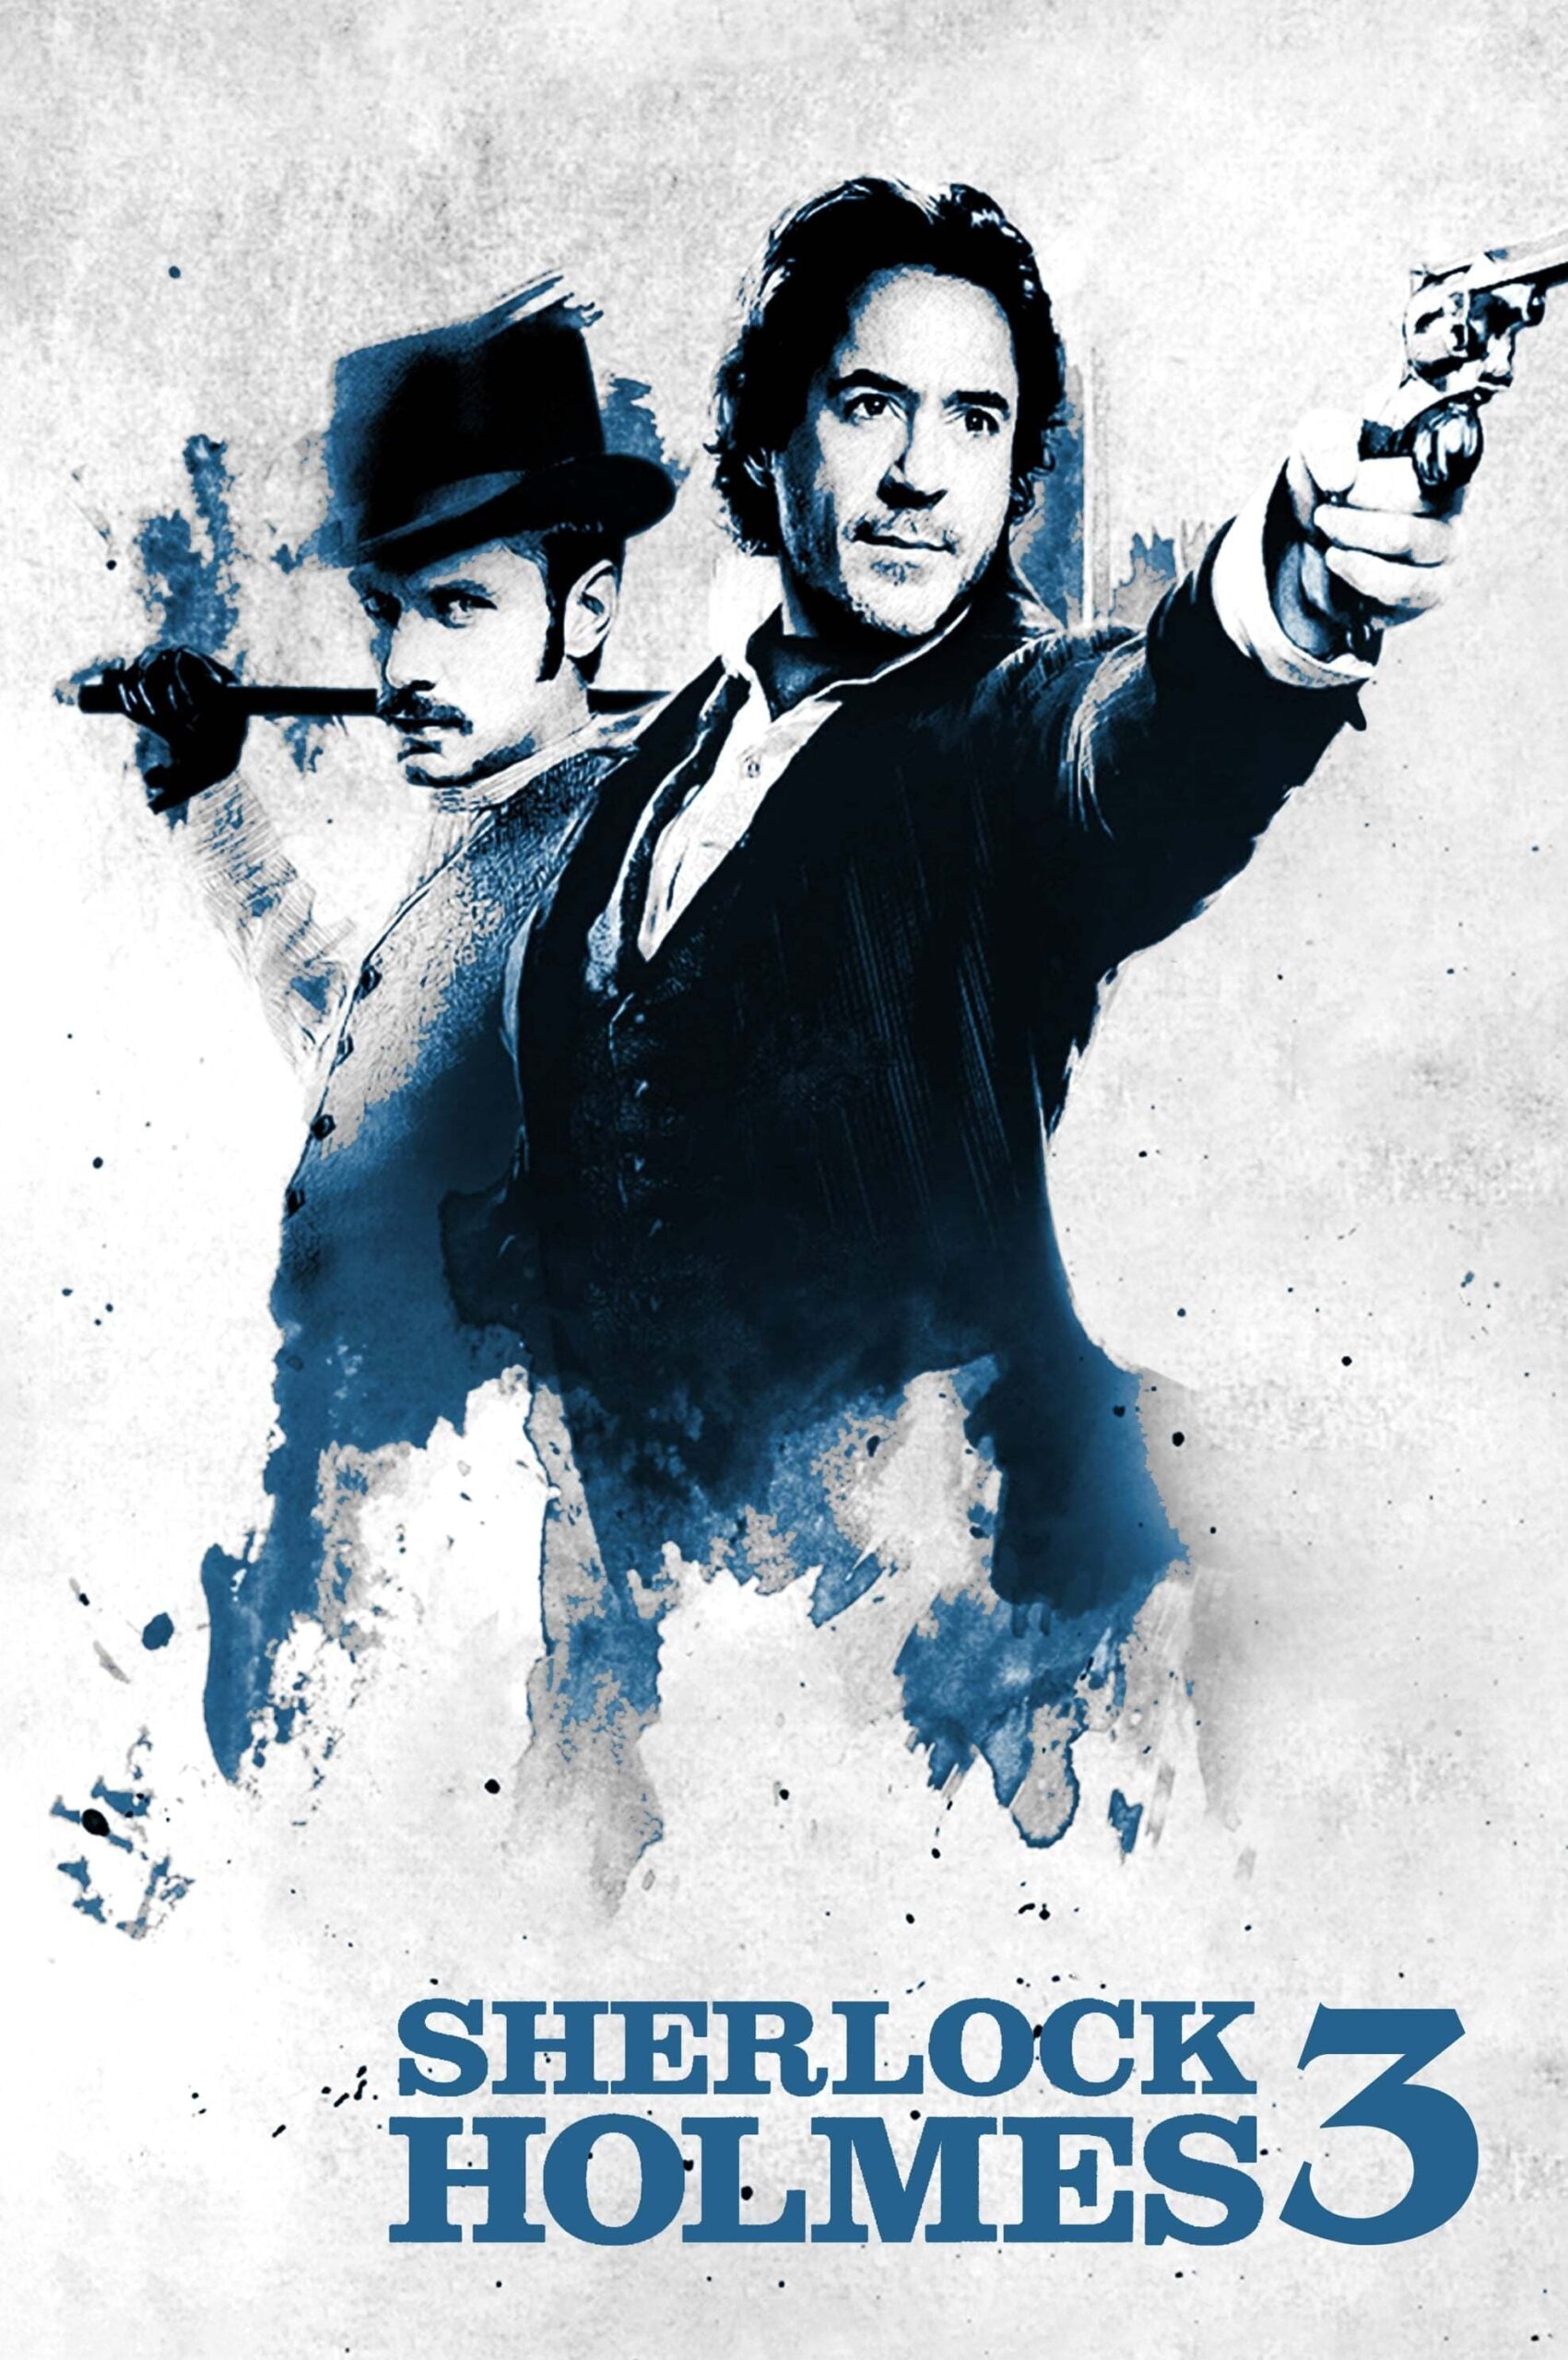 Poster for the movie "Sherlock Holmes 3"